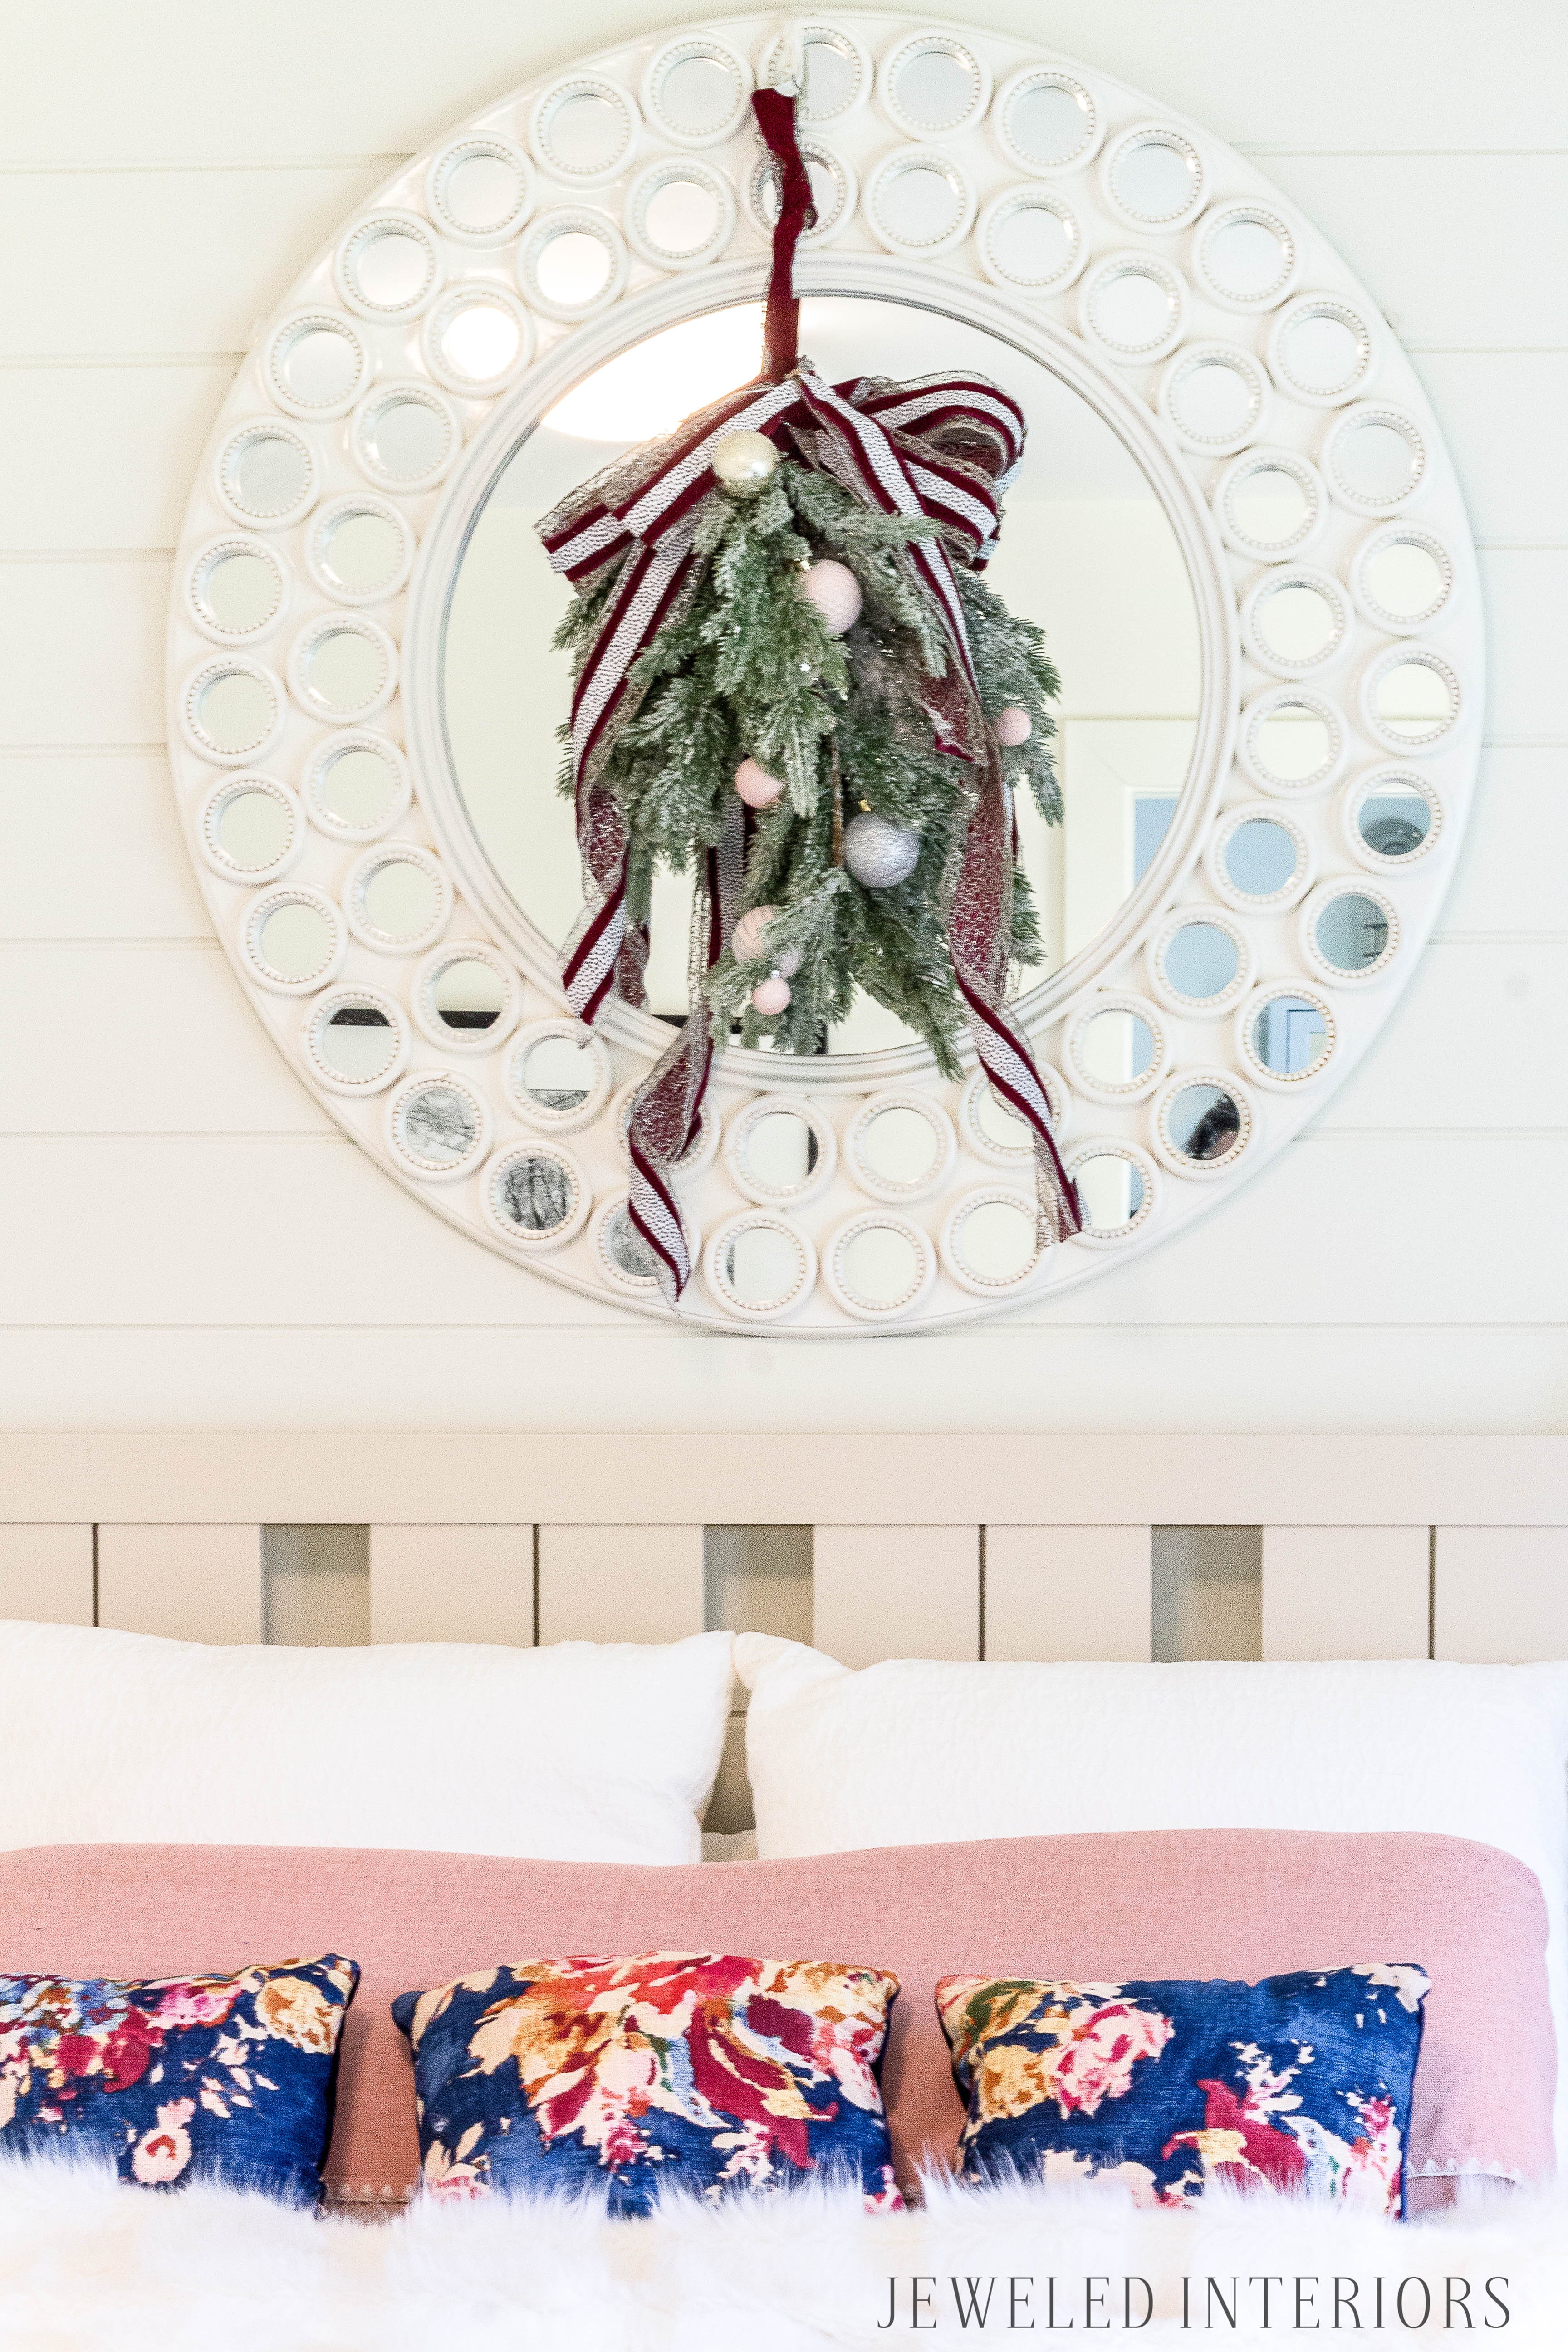 Looking for inspiration for a eclectic, chic, an glam Christmas? You have got to see this! Jeweled Interiors, Holiday, Home Tour, Burgundy, cranberry, blush, Christmas, Decor, Ideas, Tips, wreaths, Christmas, tree, decor, decorations, DIY, inspiration, red, maroon, wine, home tour, poinsettia, glam, chic, peach, gold, black, white